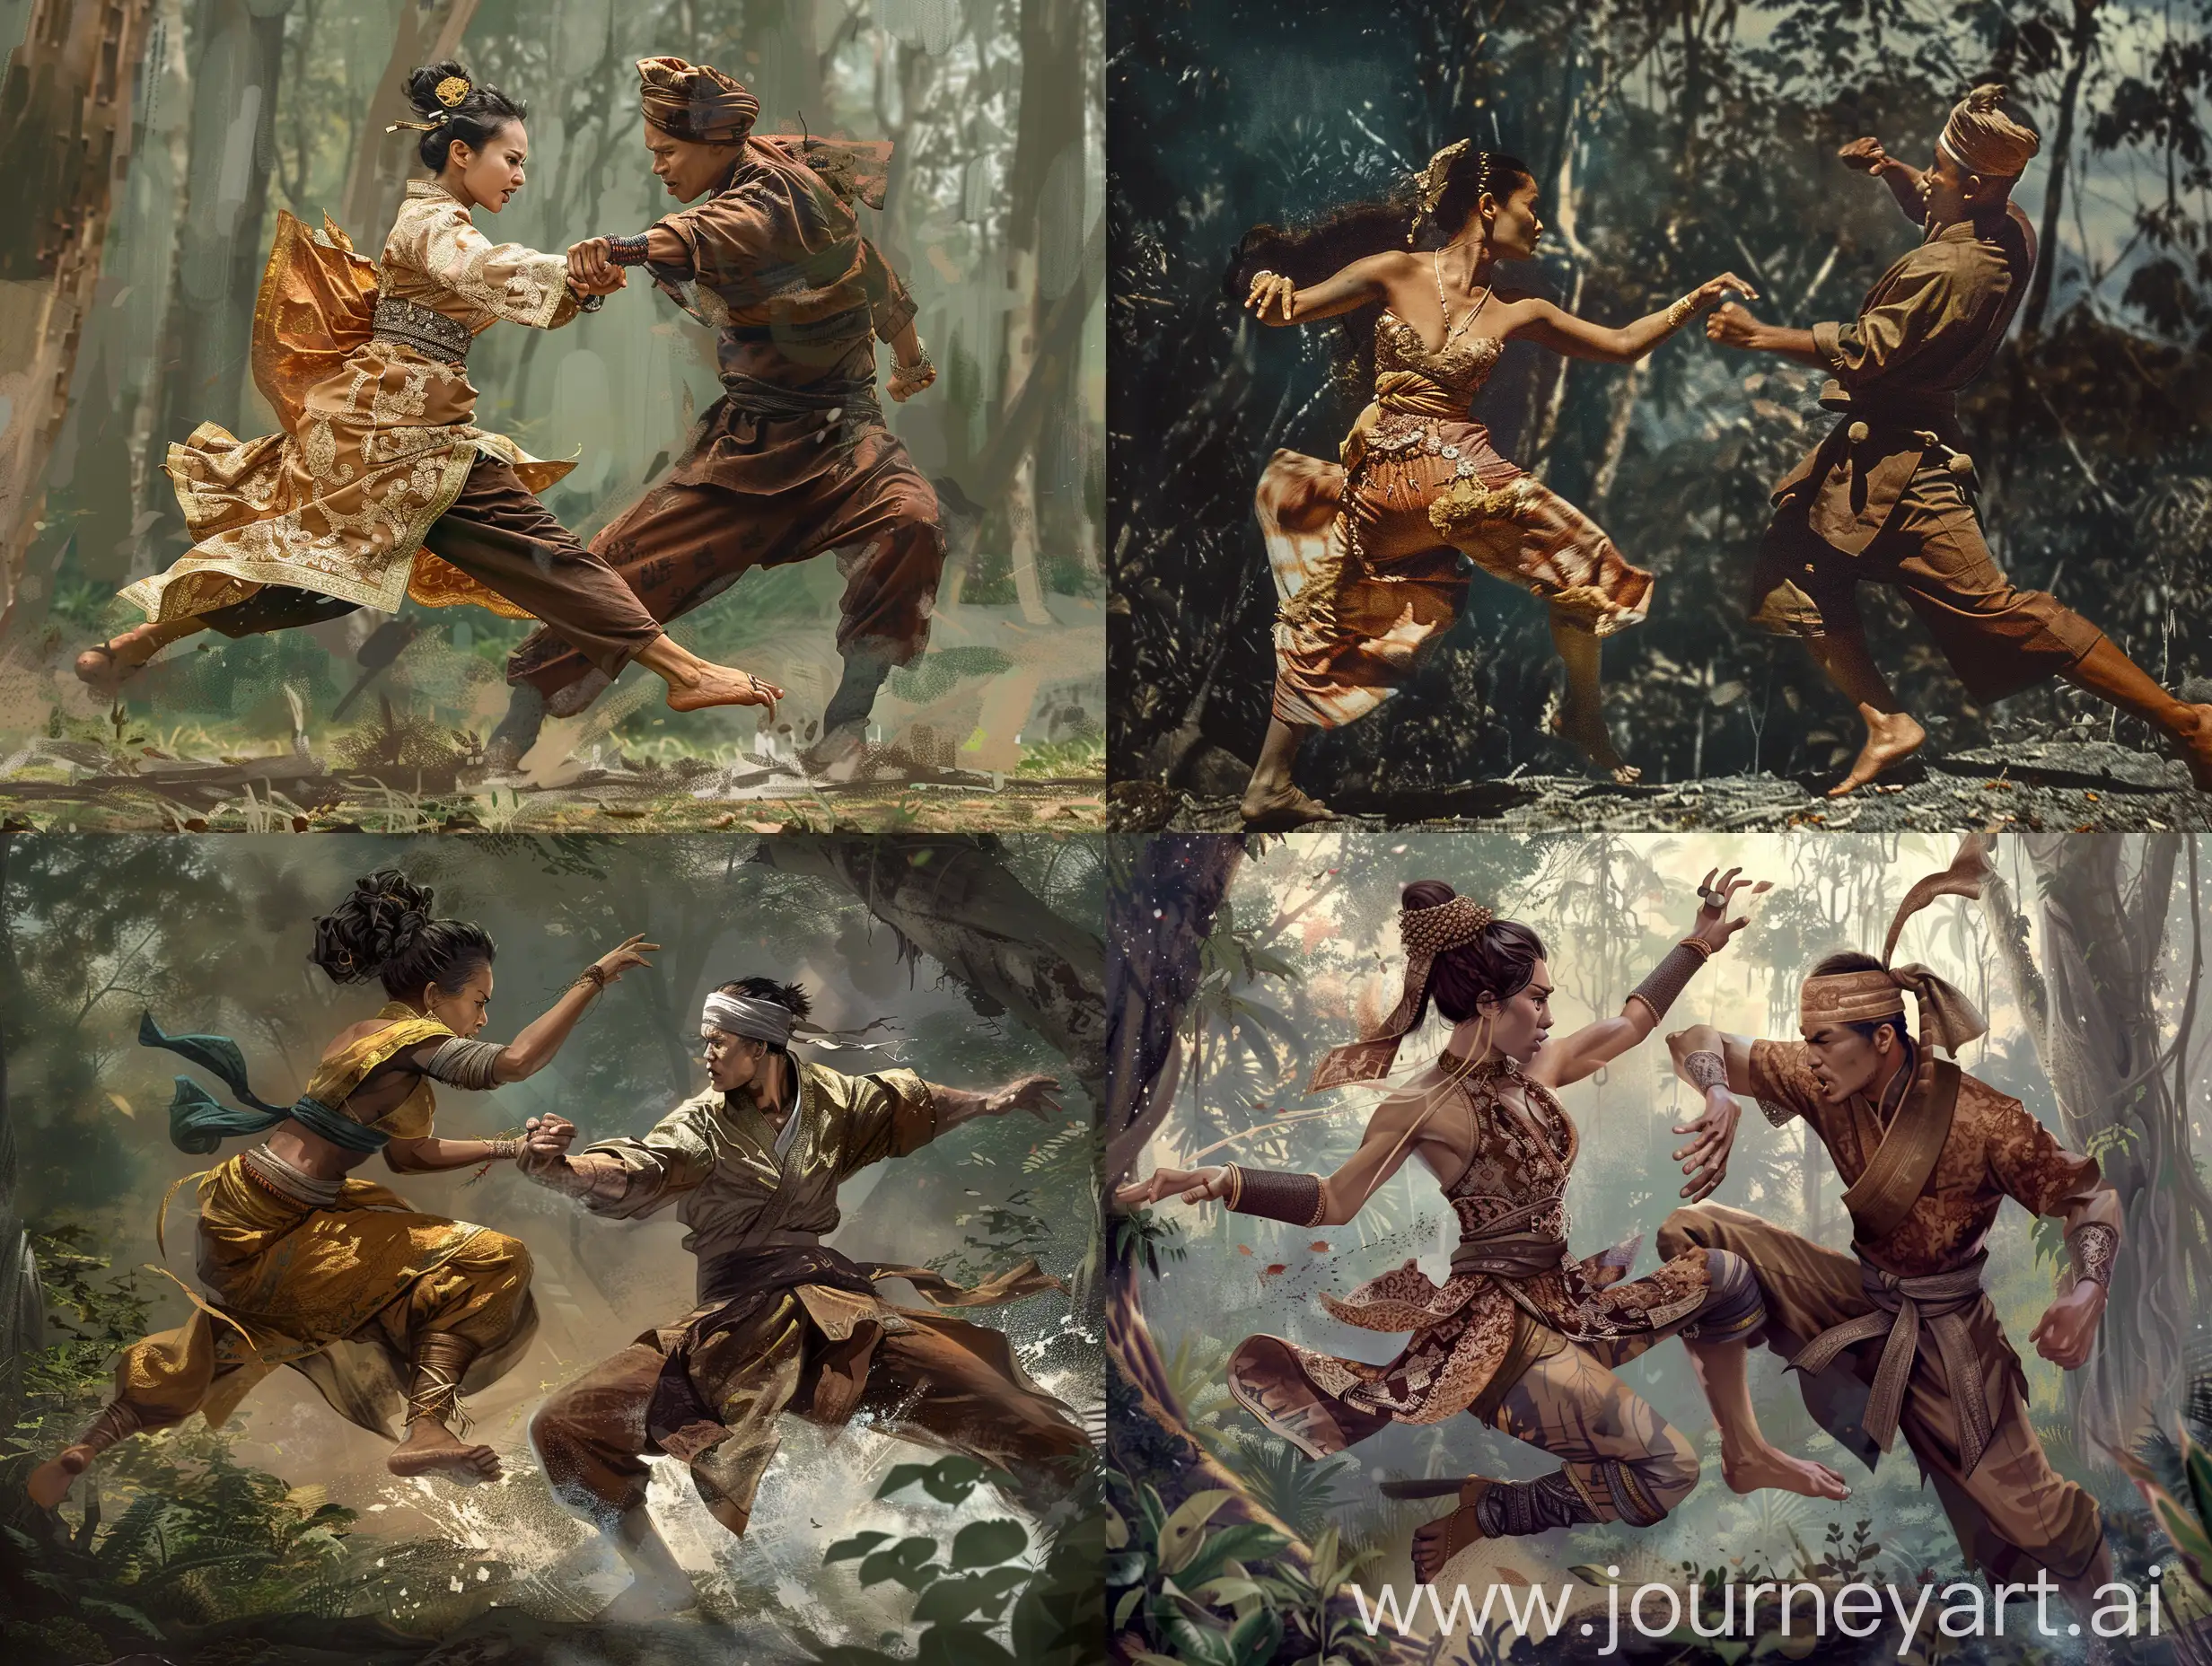 Traditional-Indonesian-Martial-Arts-Duel-in-Forest-Setting